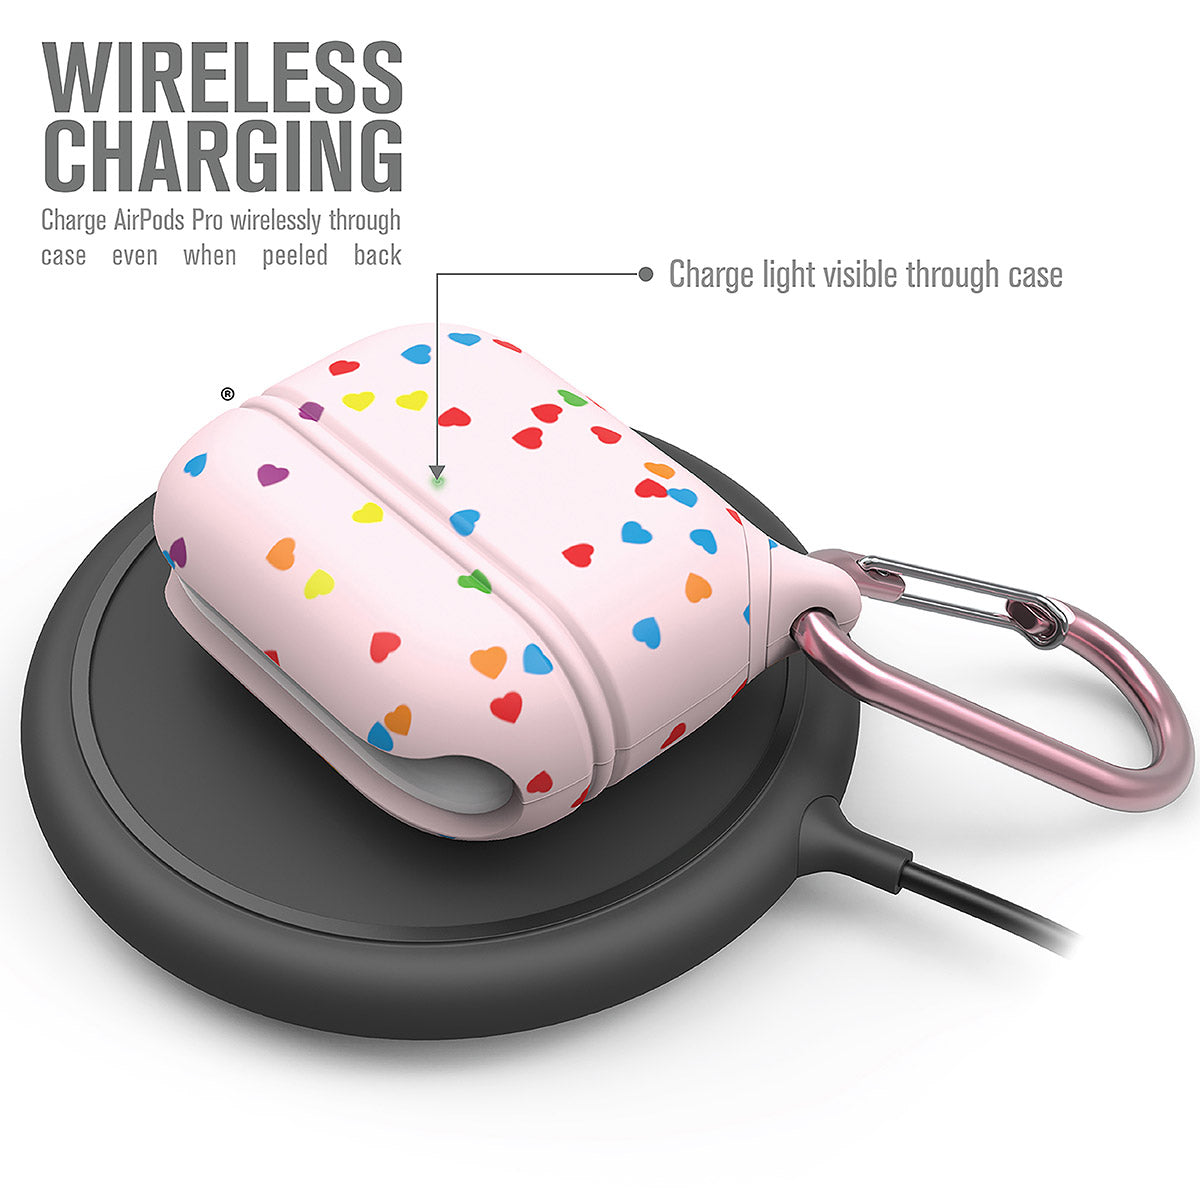 CATAPLAPDPROSWT | catalyst airpods pro gen 2 1 waterproof case carabiner special edition pink with hearts on top of a wireless charger text reads wireless charging charge airpods pro wirelessly through case even when peeled back charge light visible through case